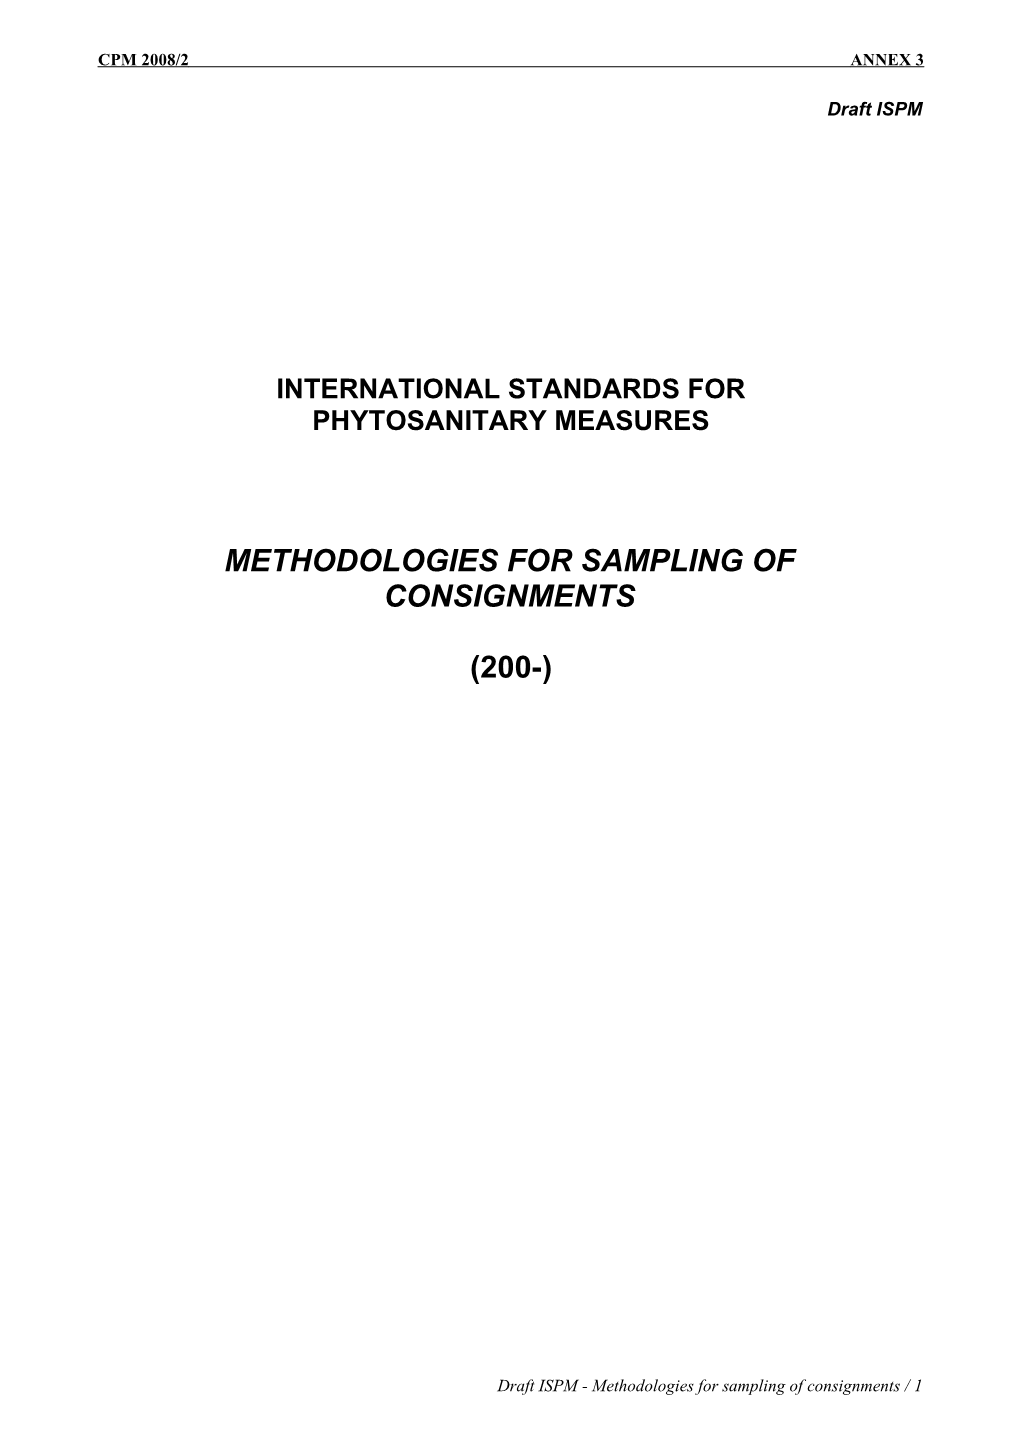 Methodologies for Sampling of Consignments